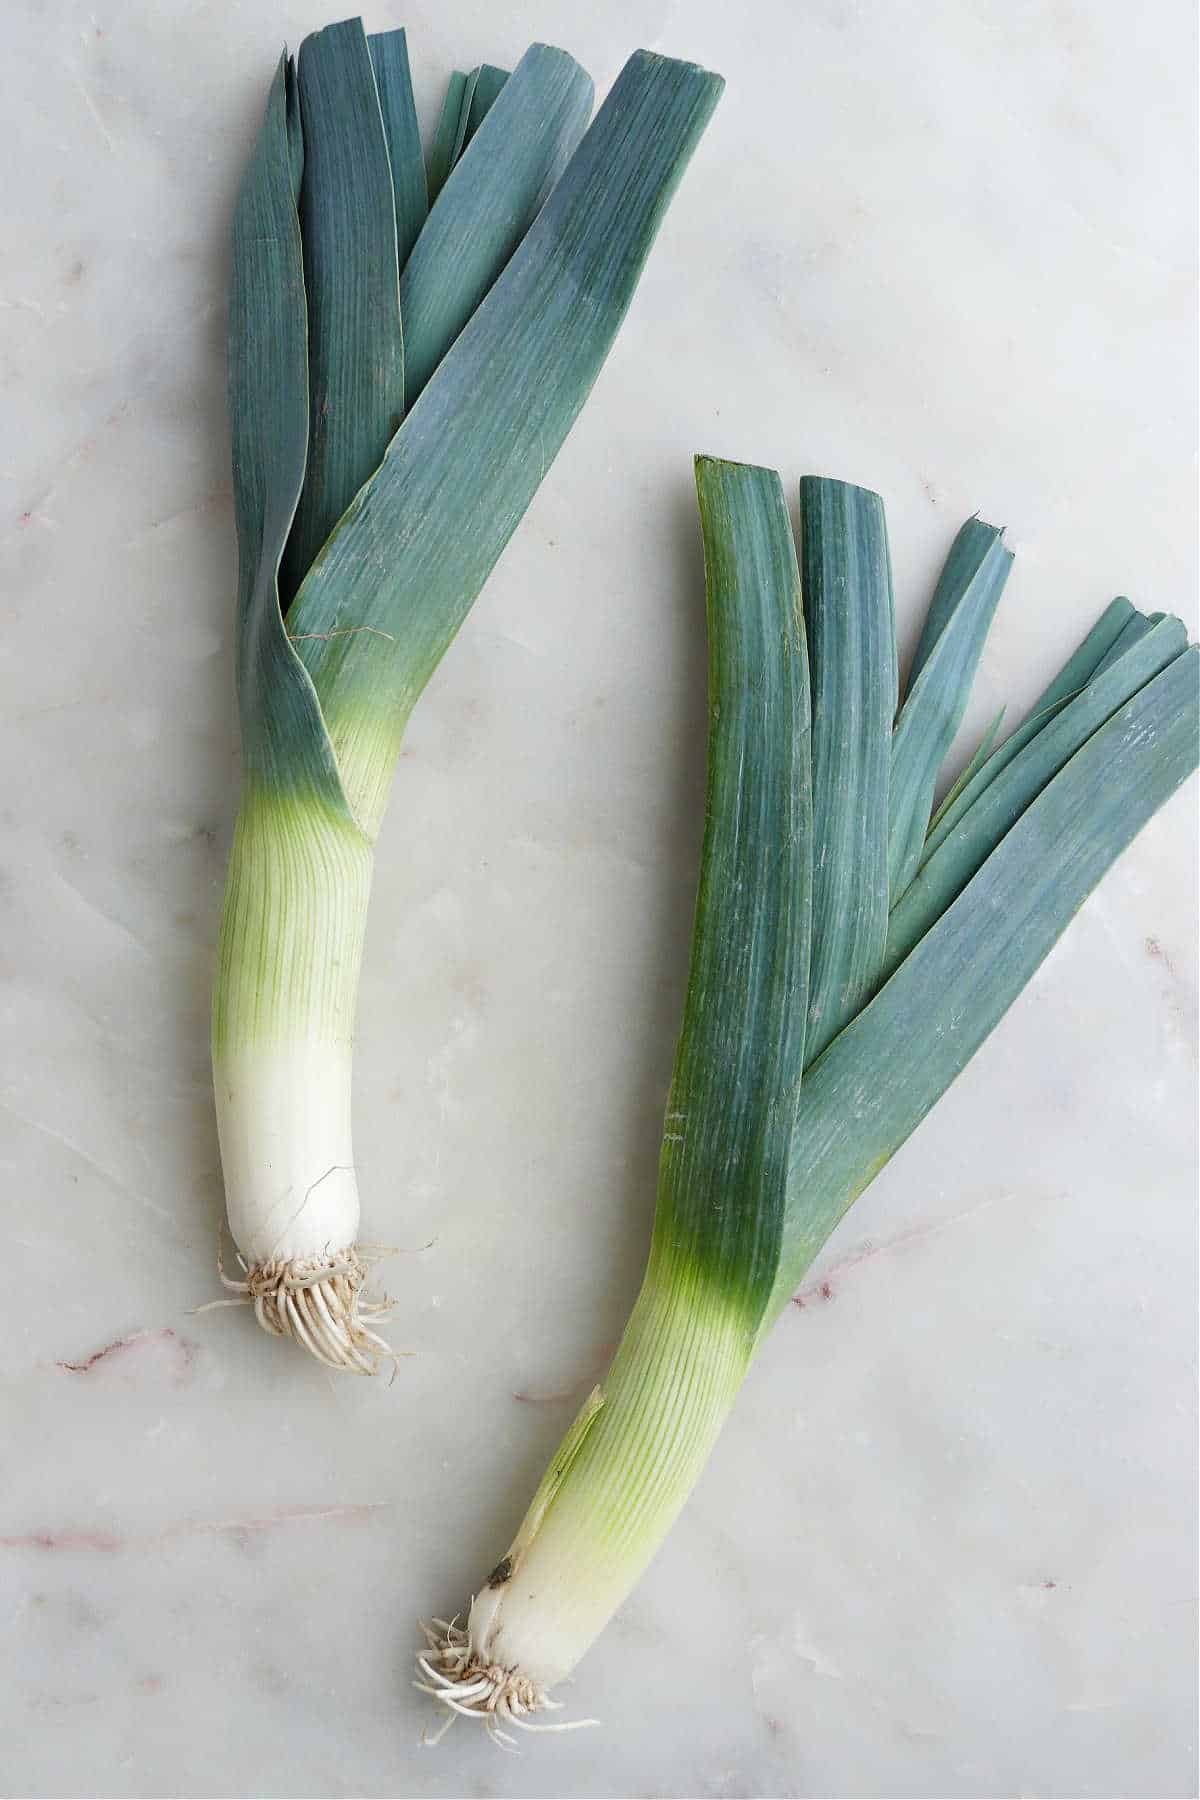 two whole leeks next to each other on a counter